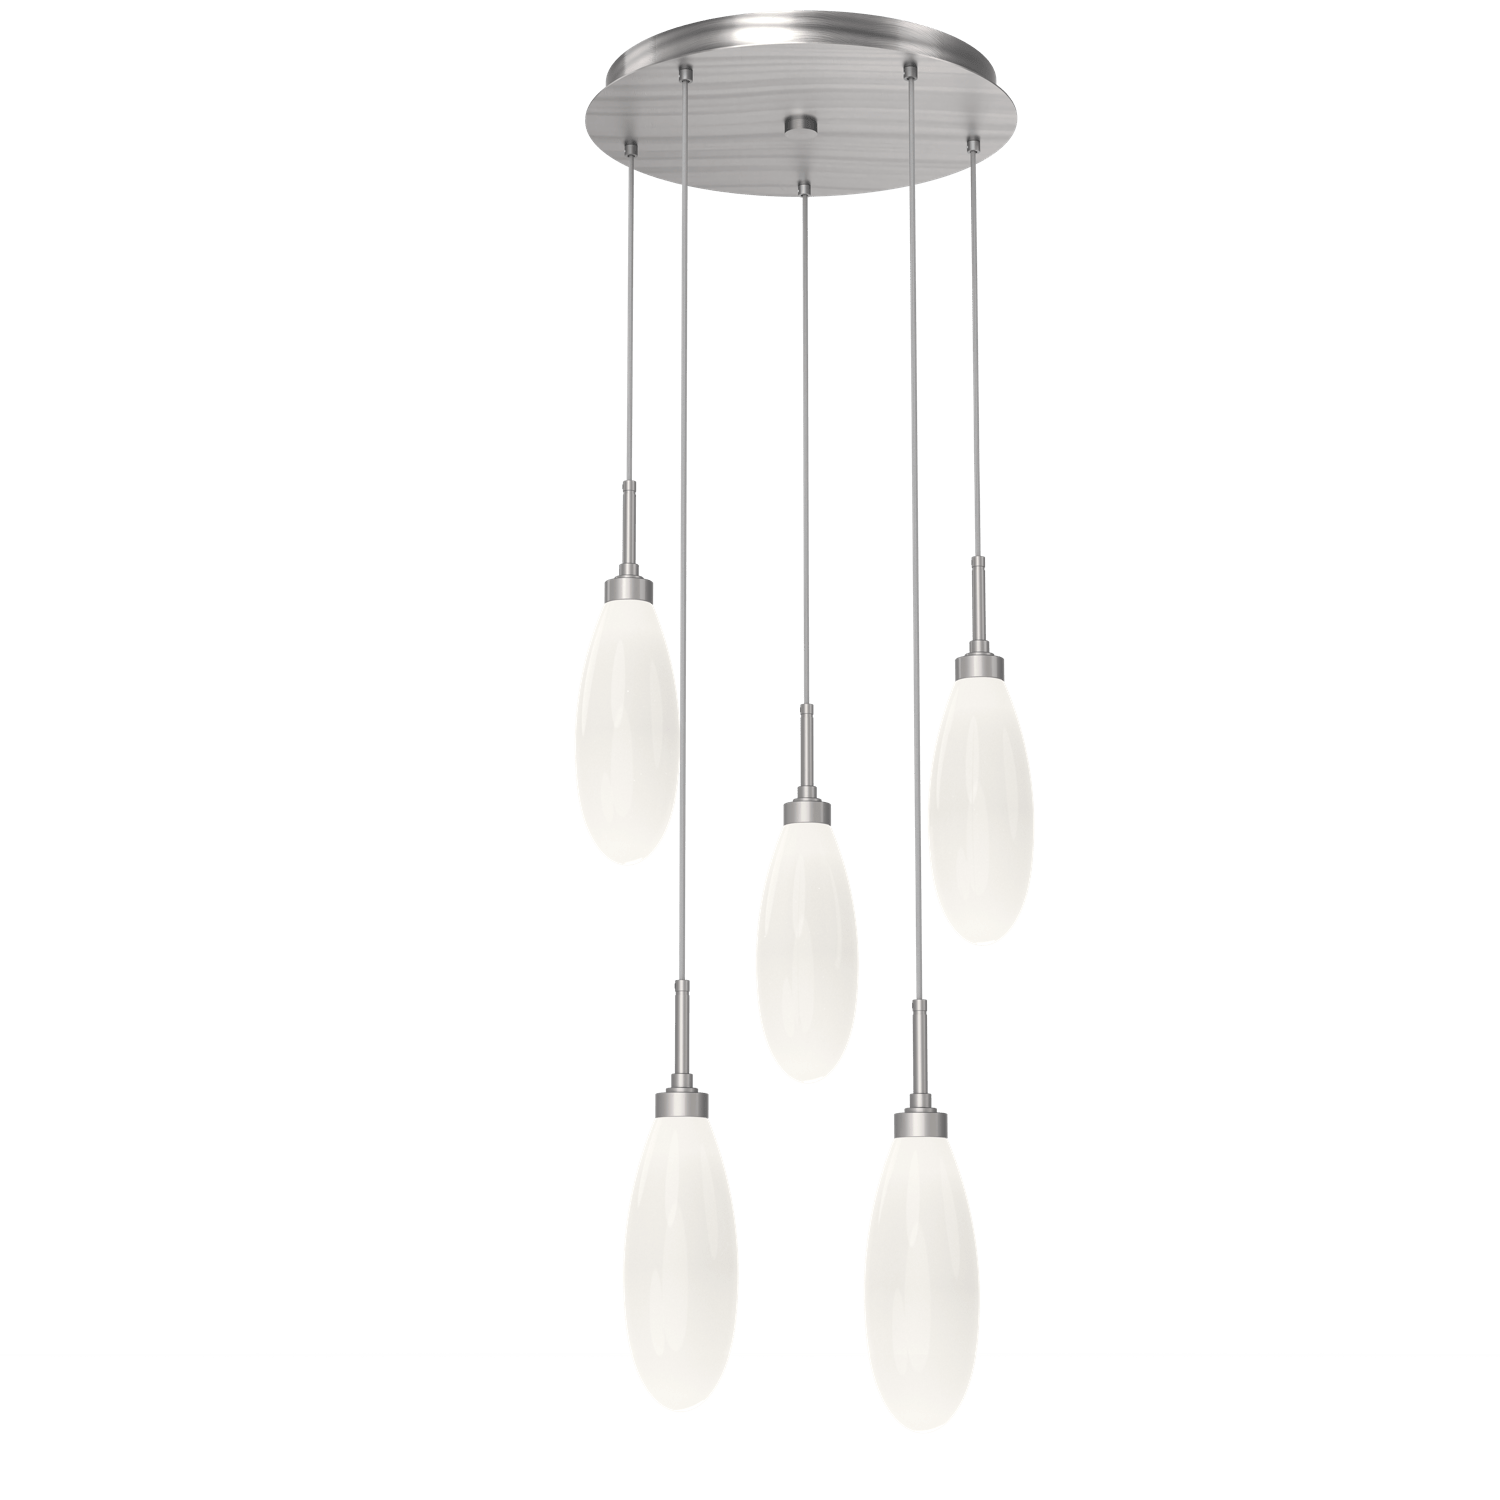 CHB0071-05-SN-WL-LL-Hammerton-Studio-Fiori-5-light-round-pendant-chandelier-with-satin-nickel-finish-and-opal-white-glass-shades-and-LED-lamping